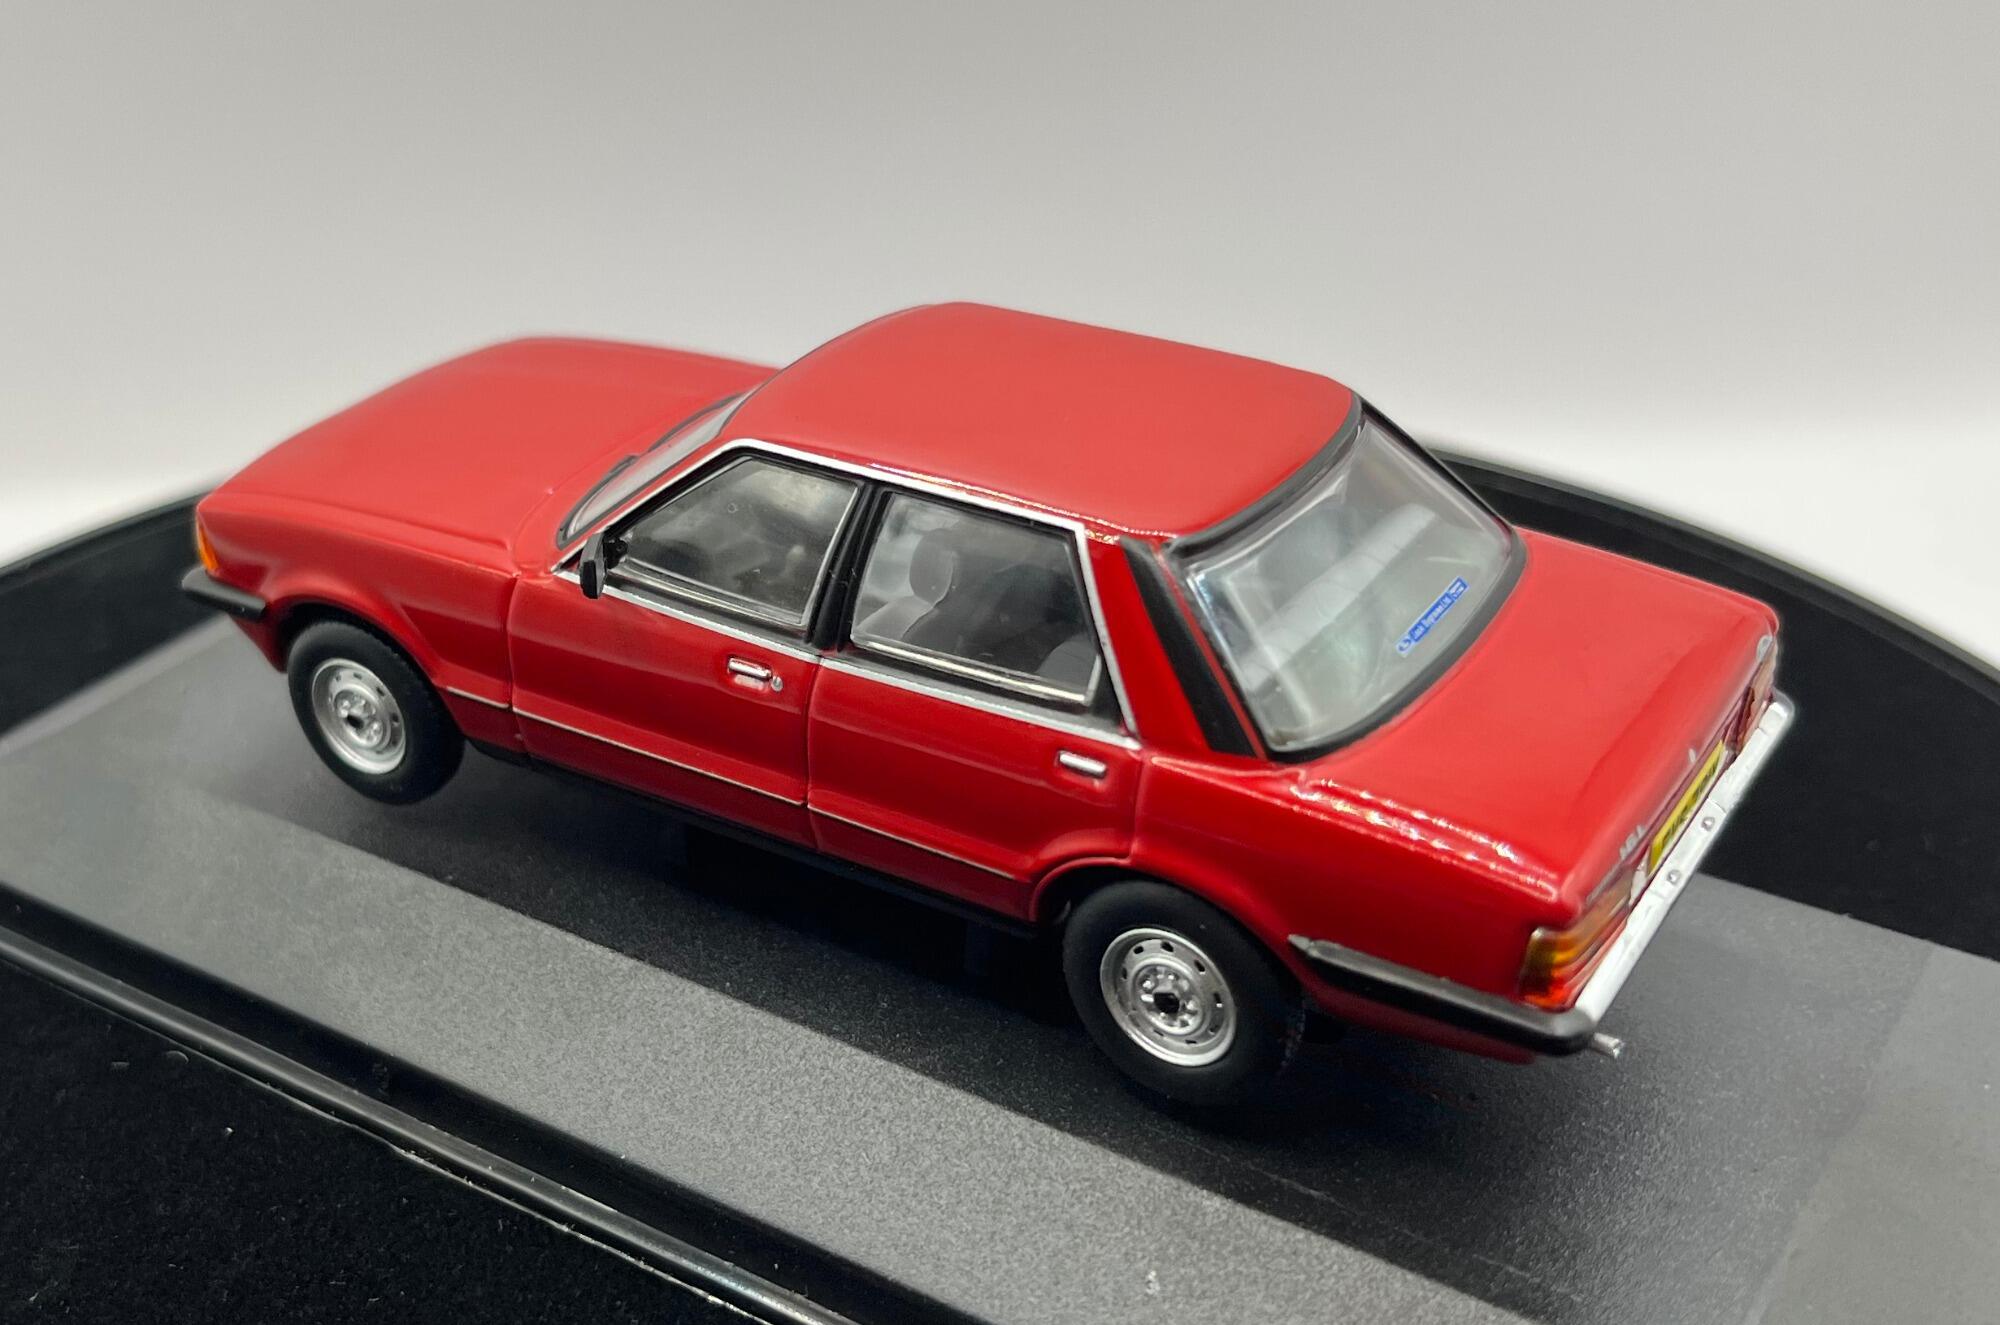 Ford Cortina mk5 1.6L in cardinal red, 1982, 1:43 scale diecast car model from Corgi Vanguards, limited edition